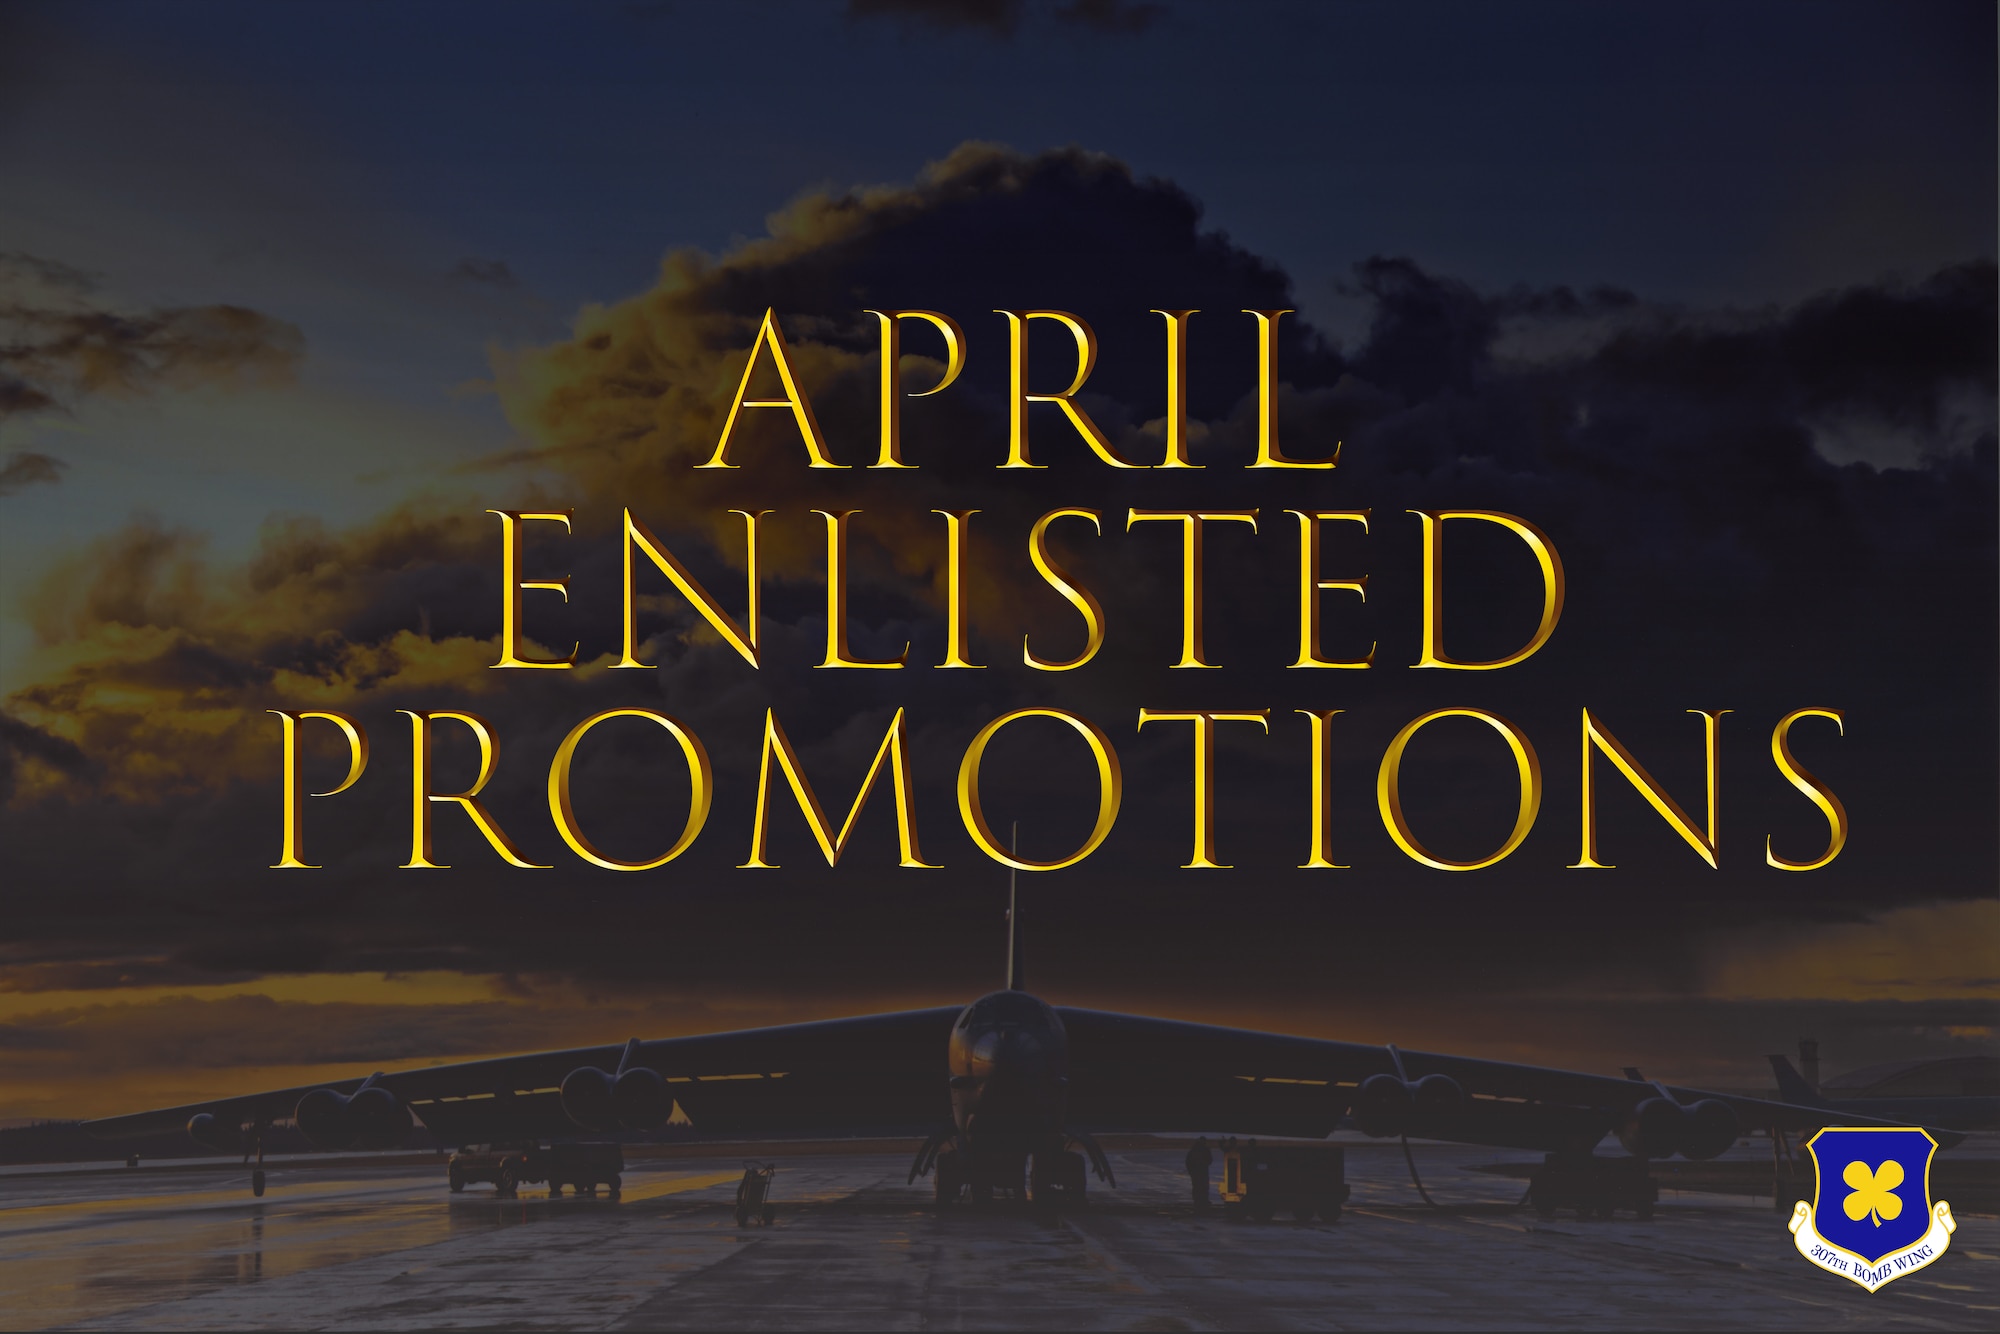 This graphic shows a B-52 Stratofortress facing forward with clouds behind it. Covering the photo is text that reads "April Enlisted Promotions".